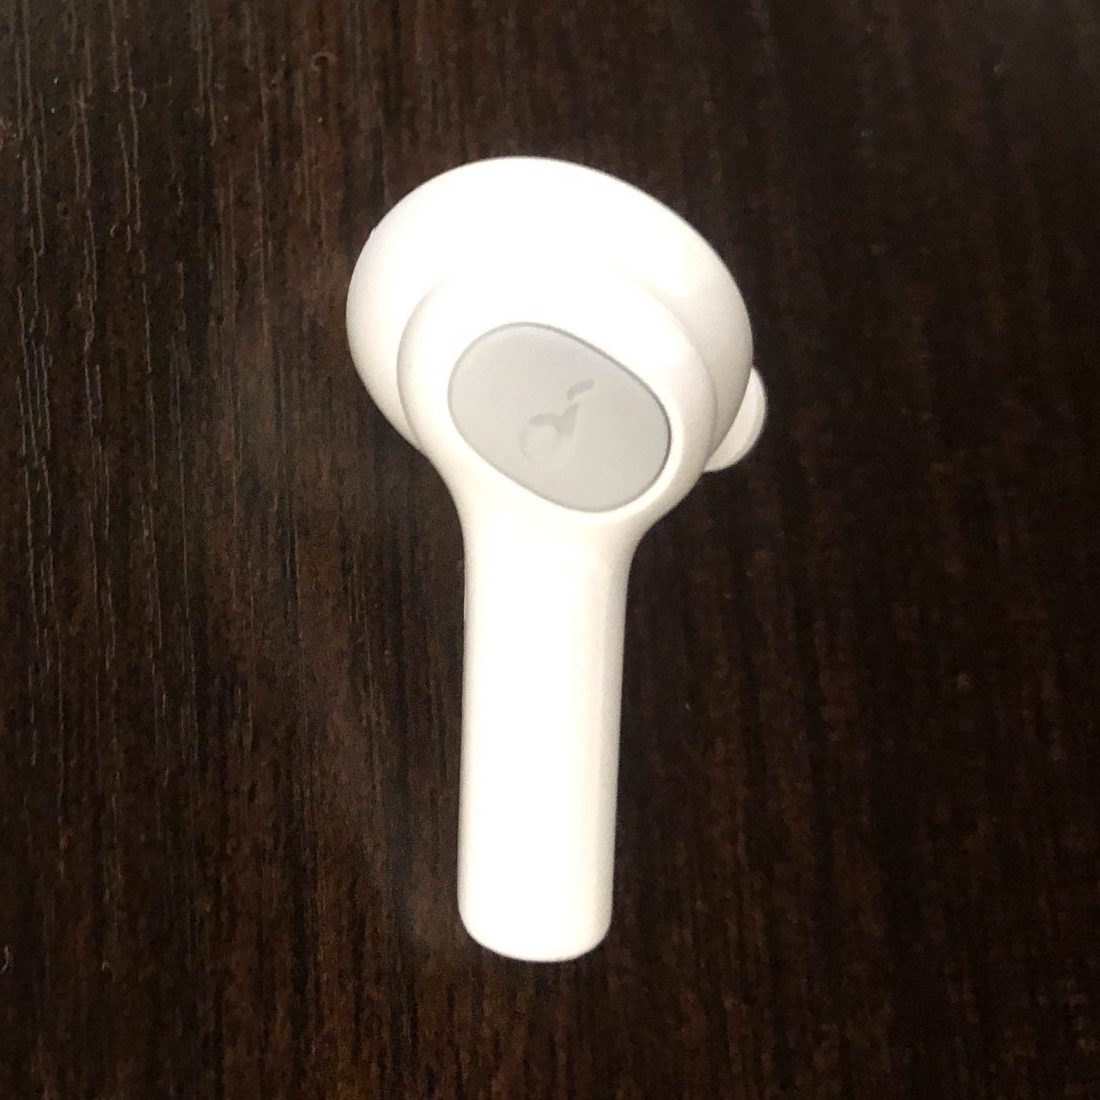 Anker Soundcore Life P2i earbud back button